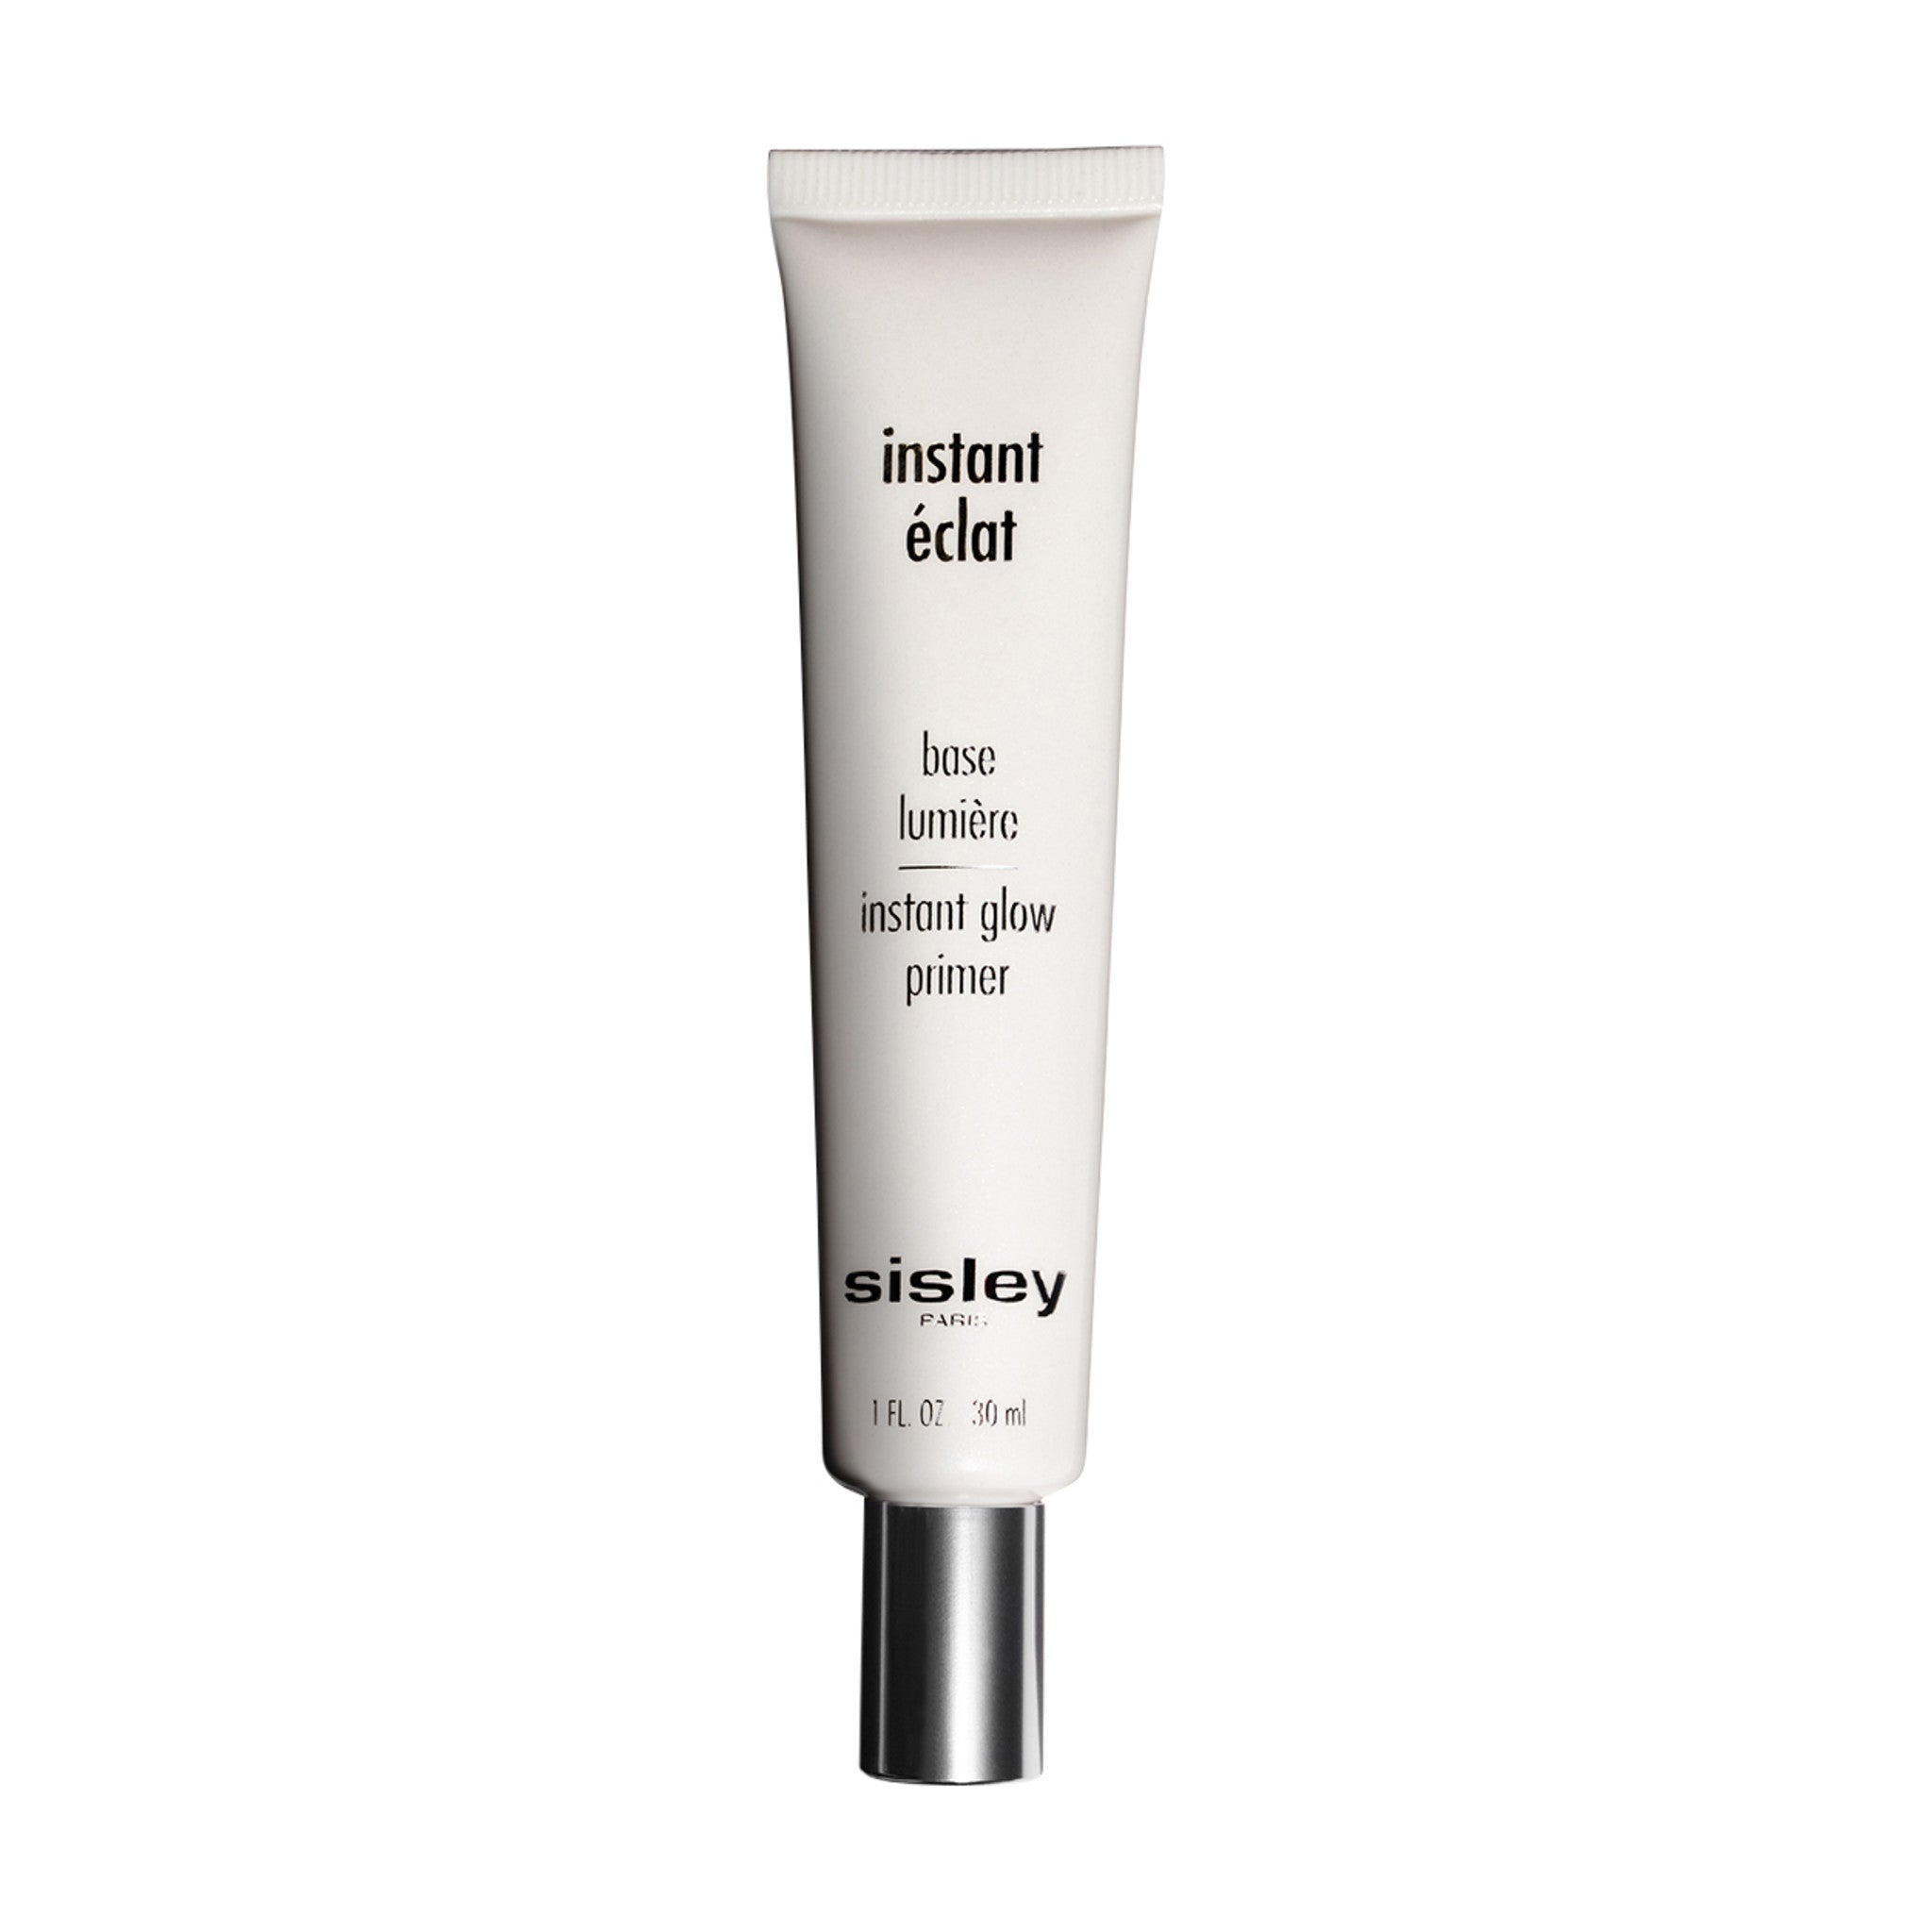 Sisley-Paris Instant Eclat Primer main image. This product is in the color clear